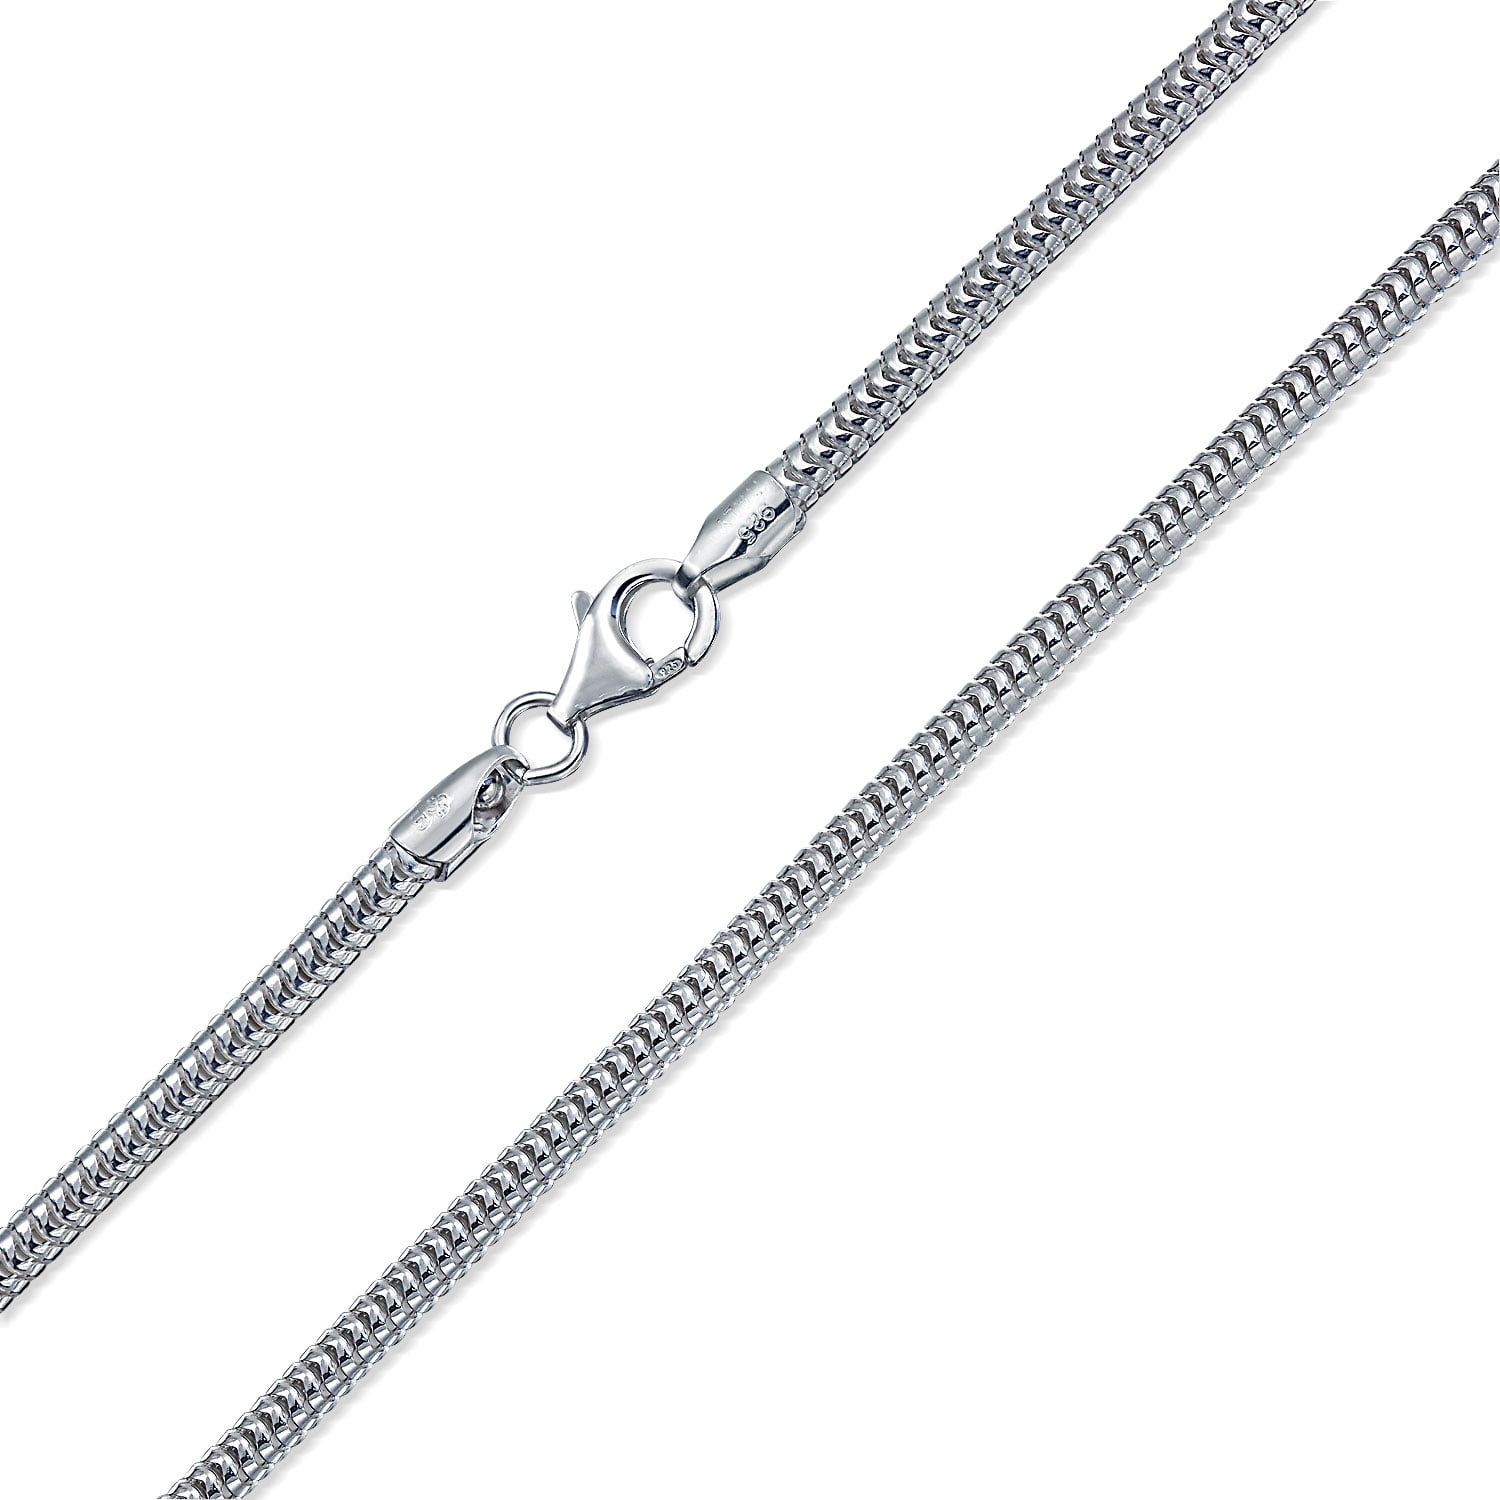 Heavy 320 Gauge Strong Flexible 925 Sterling Silver Snake Chain Necklace  for Men Made In Italy 18 Inch